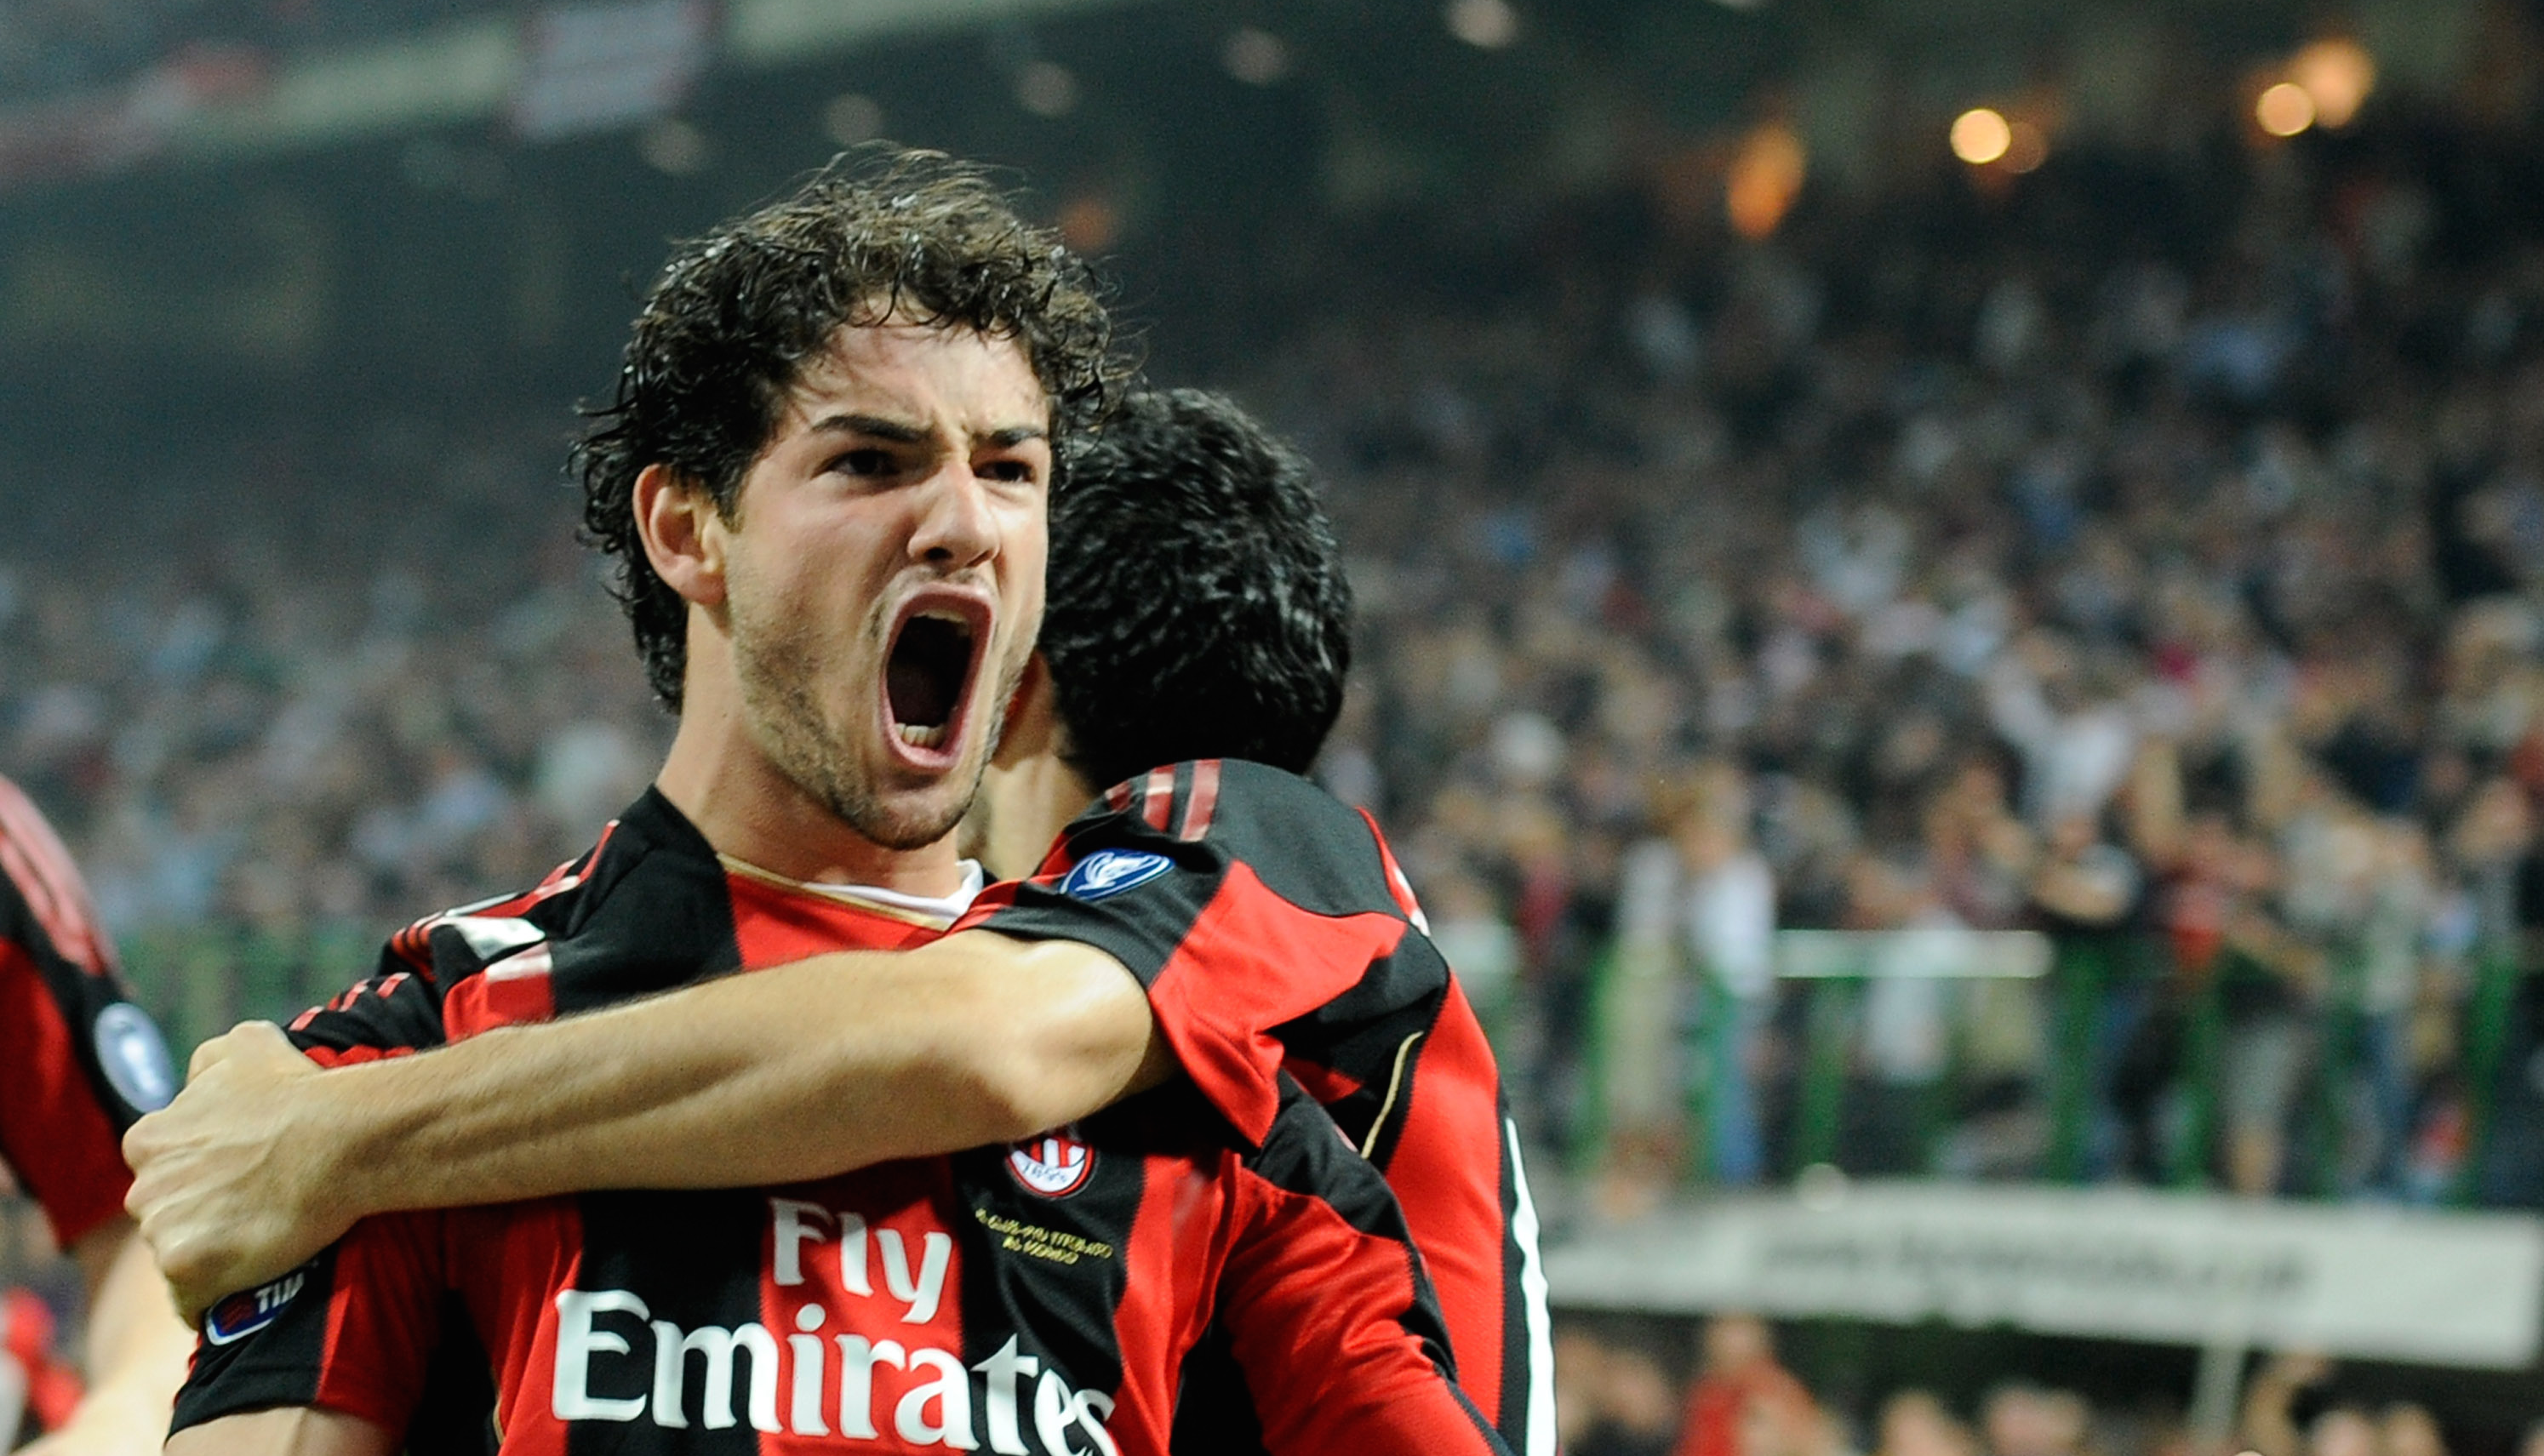 Pato: return to AC Milan? Who knows..."